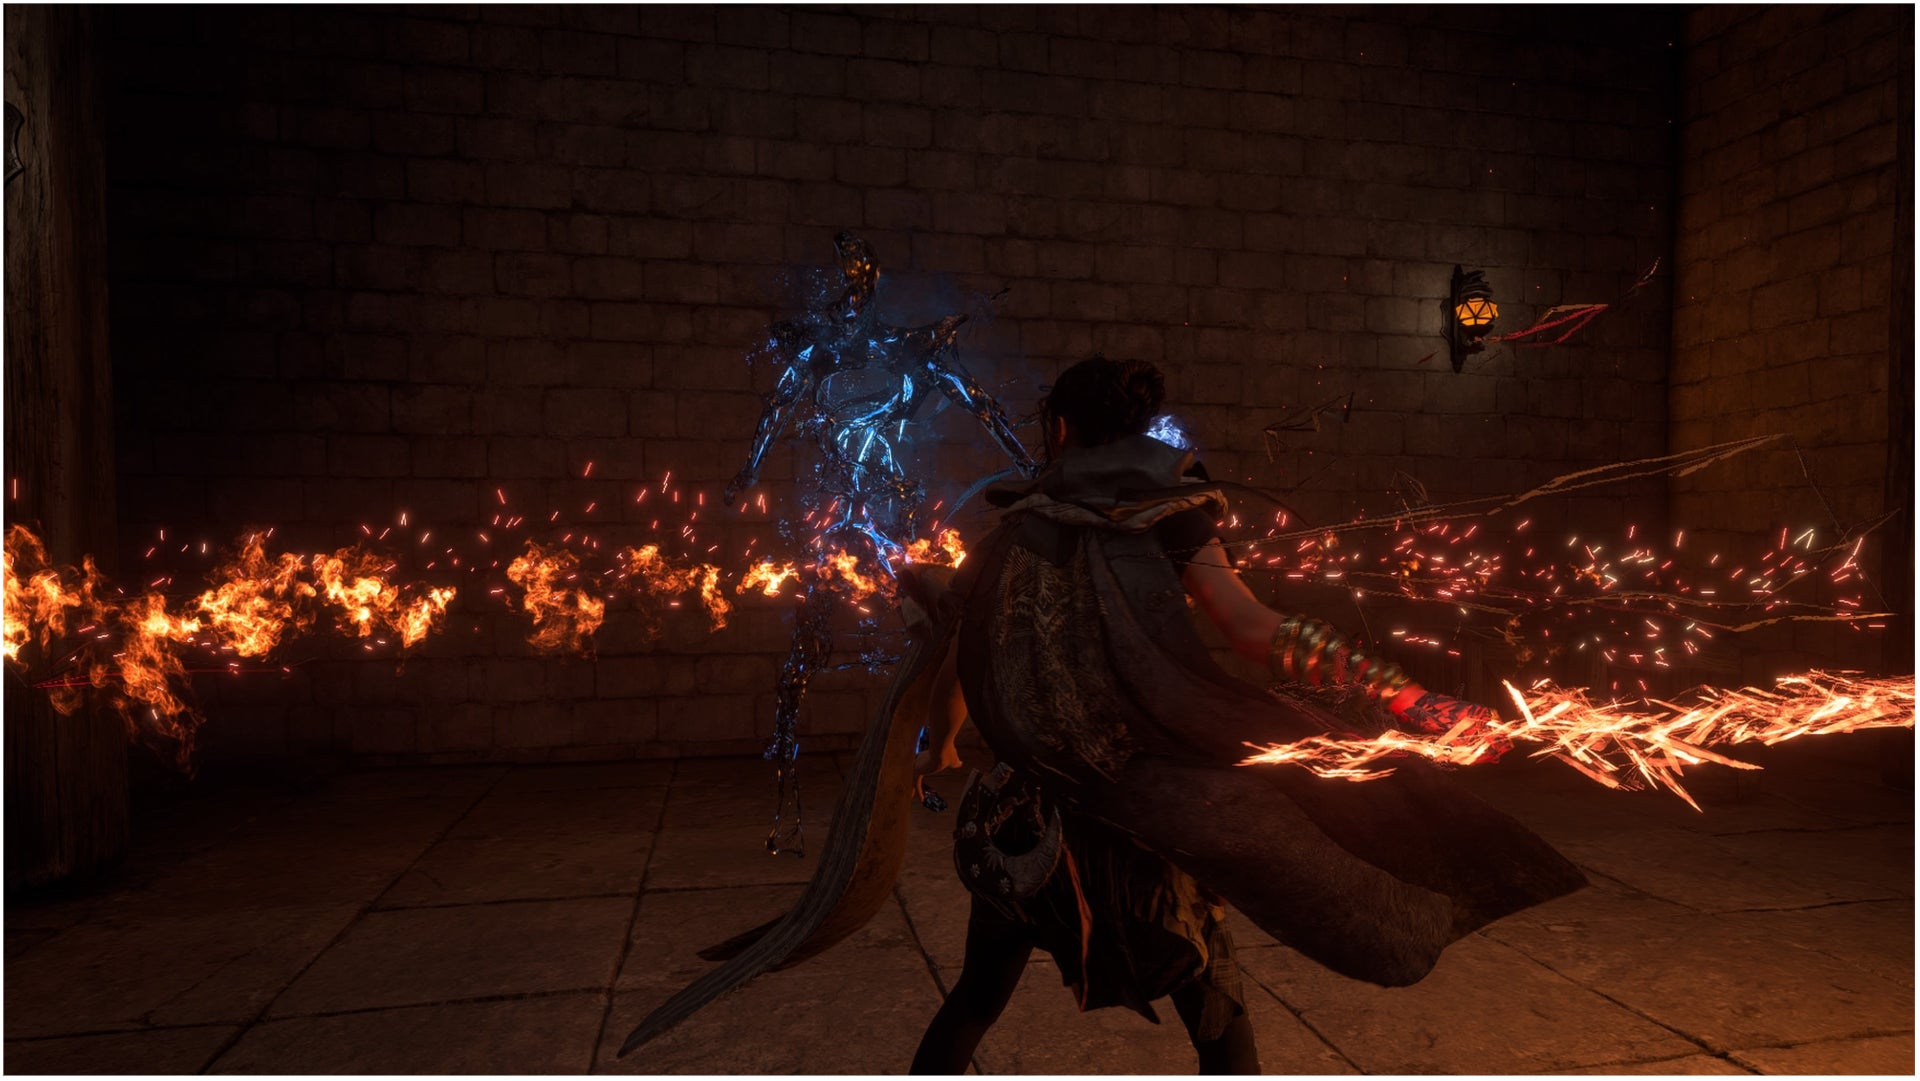 Forspoken, Frey uses Tanta Sila's magic fire-based sword to attack a nightmare stuck at the base of the tower.